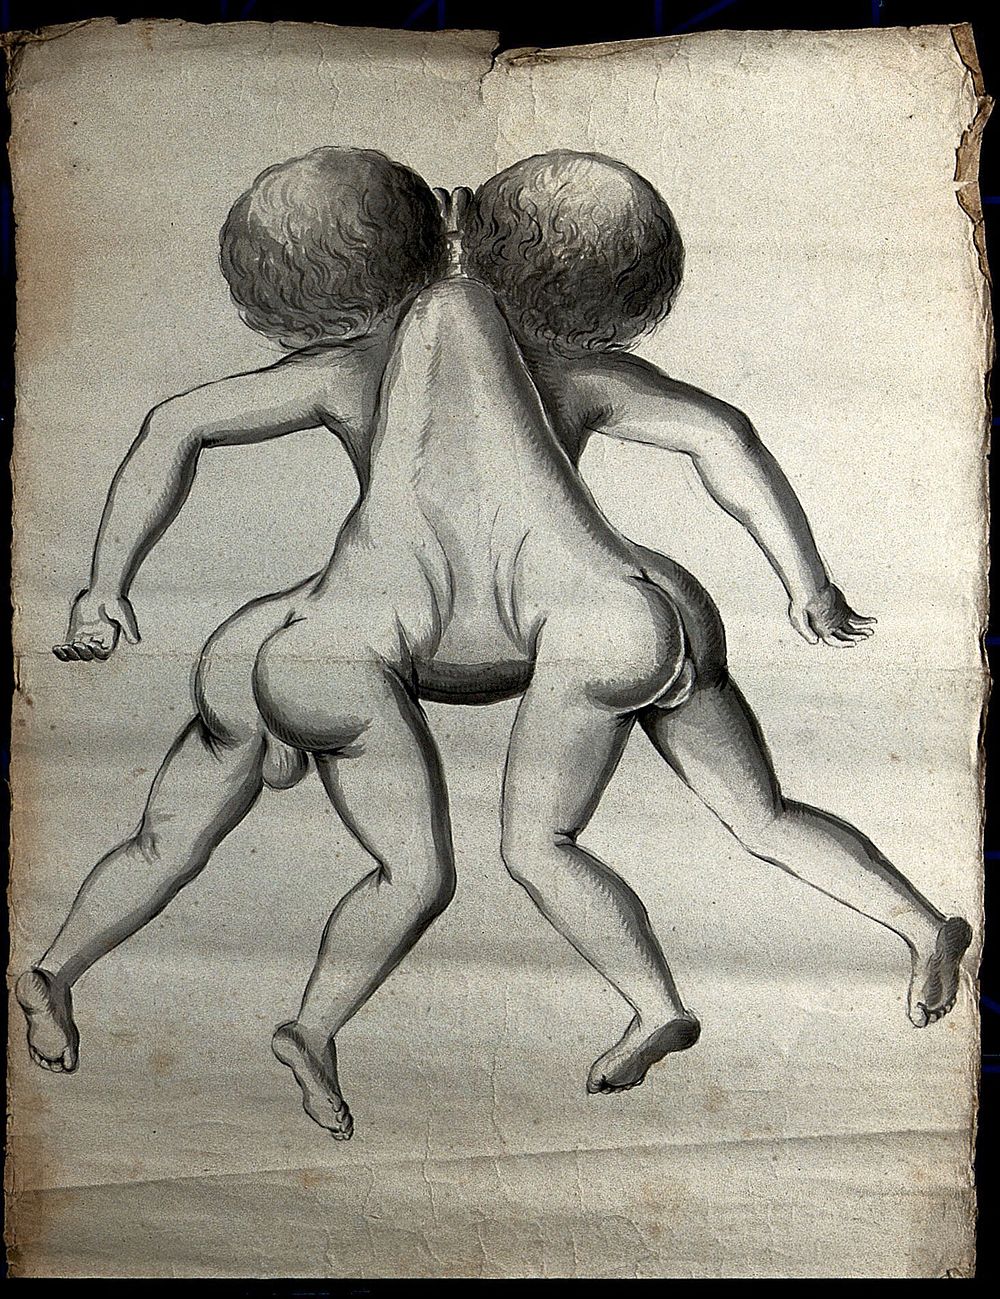 Male conjoint twins joint at the neck and chest; posterior view. Drawing, ca. 1900.